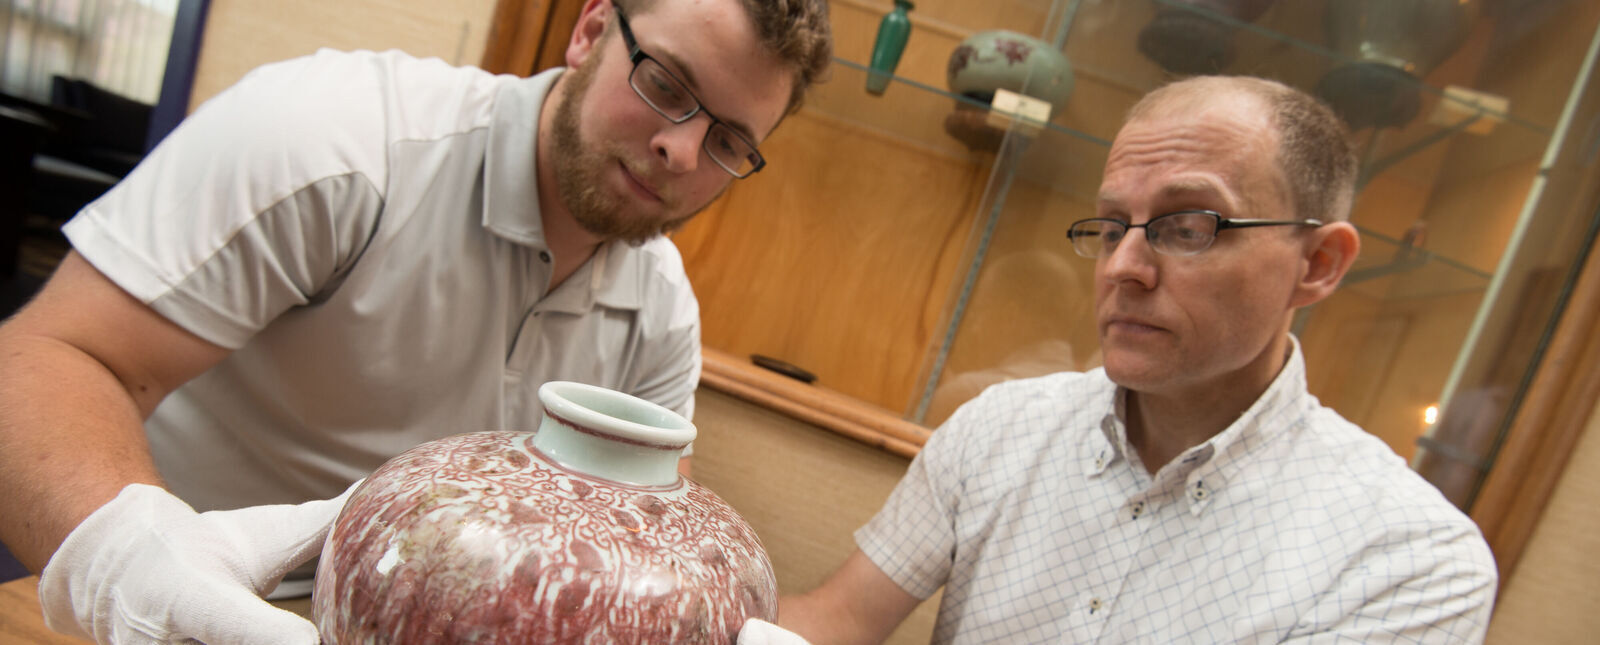 A student and professor examine pottery